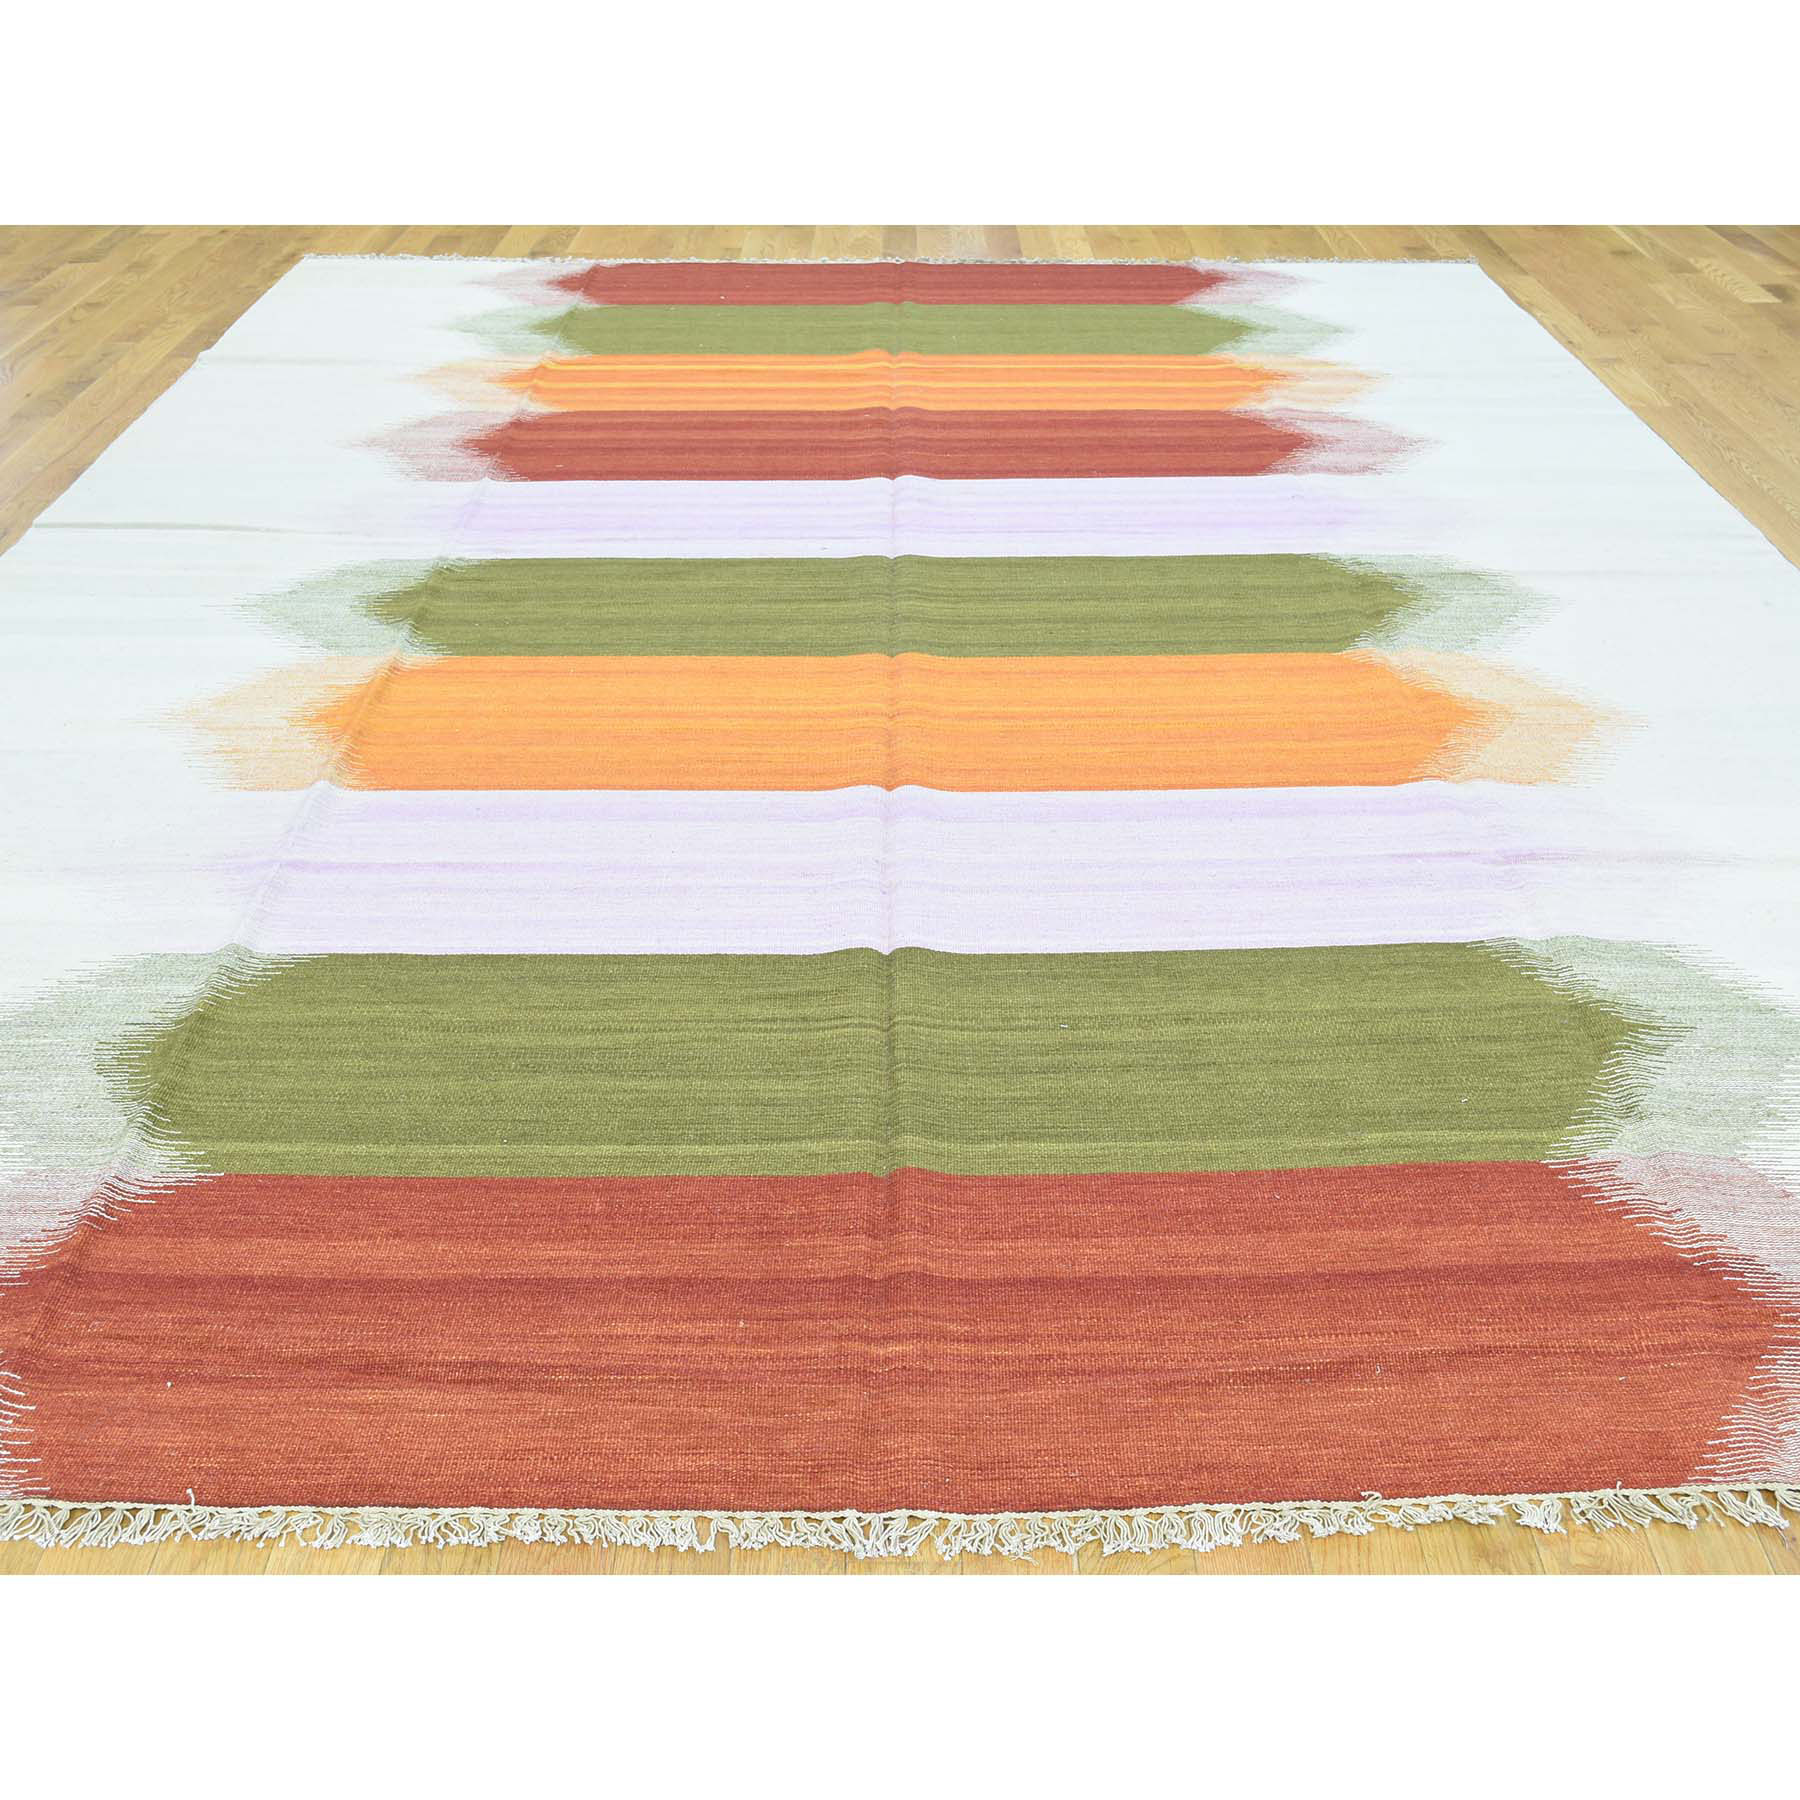 9-x12-7  Flat Weave Reversible Durie Kilim Colorful Hand-Woven Carpet 